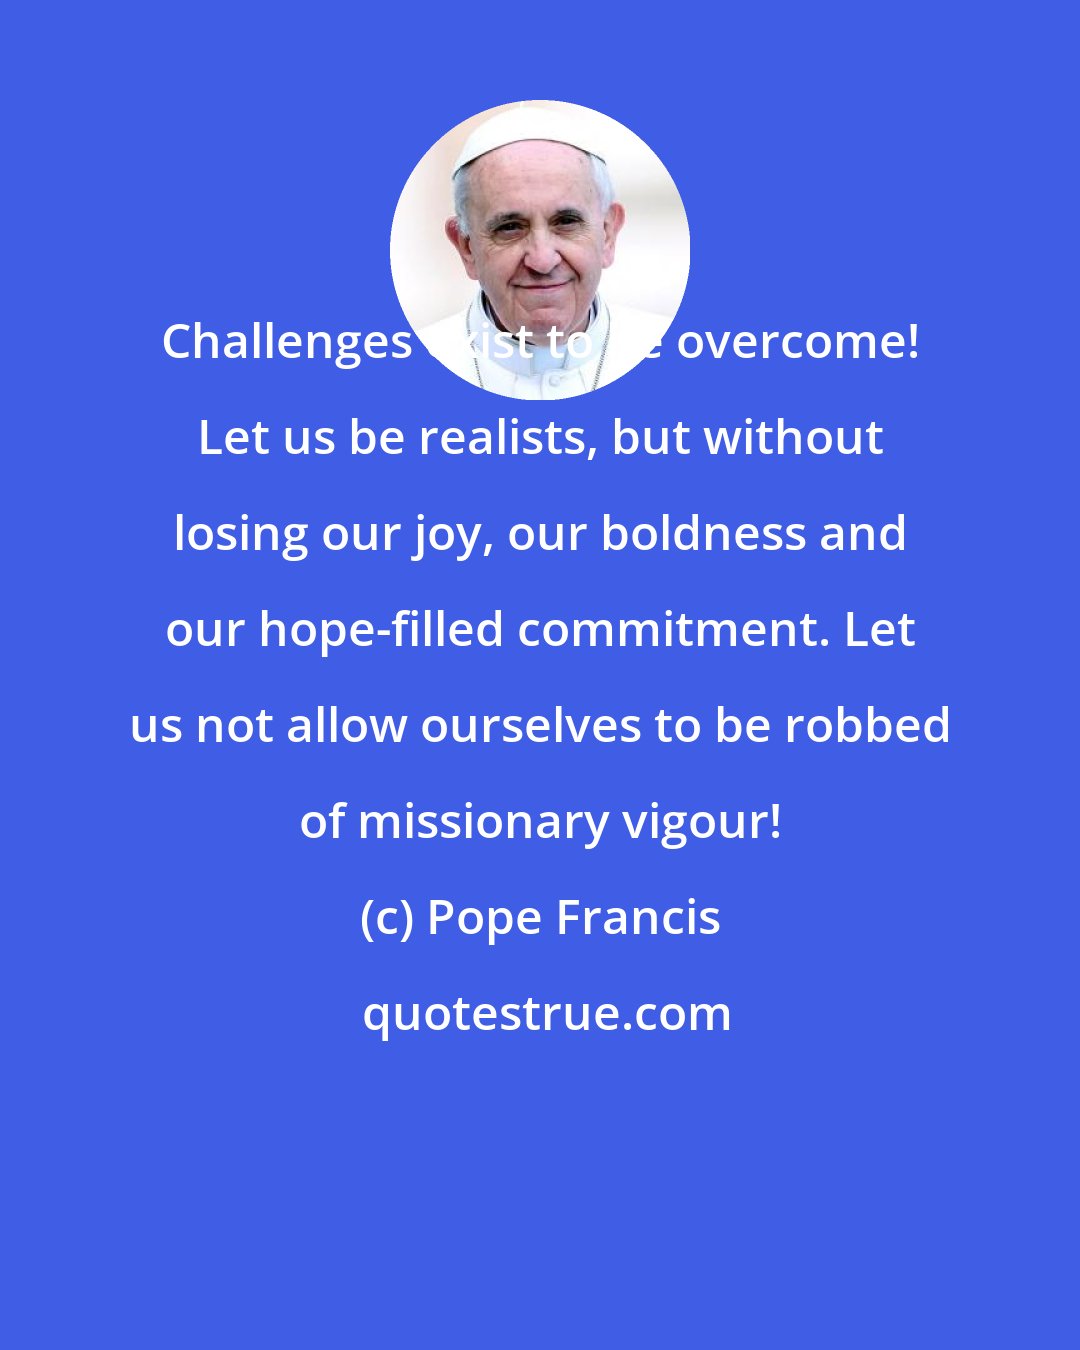 Pope Francis: Challenges exist to be overcome! Let us be realists, but without losing our joy, our boldness and our hope-filled commitment. Let us not allow ourselves to be robbed of missionary vigour!